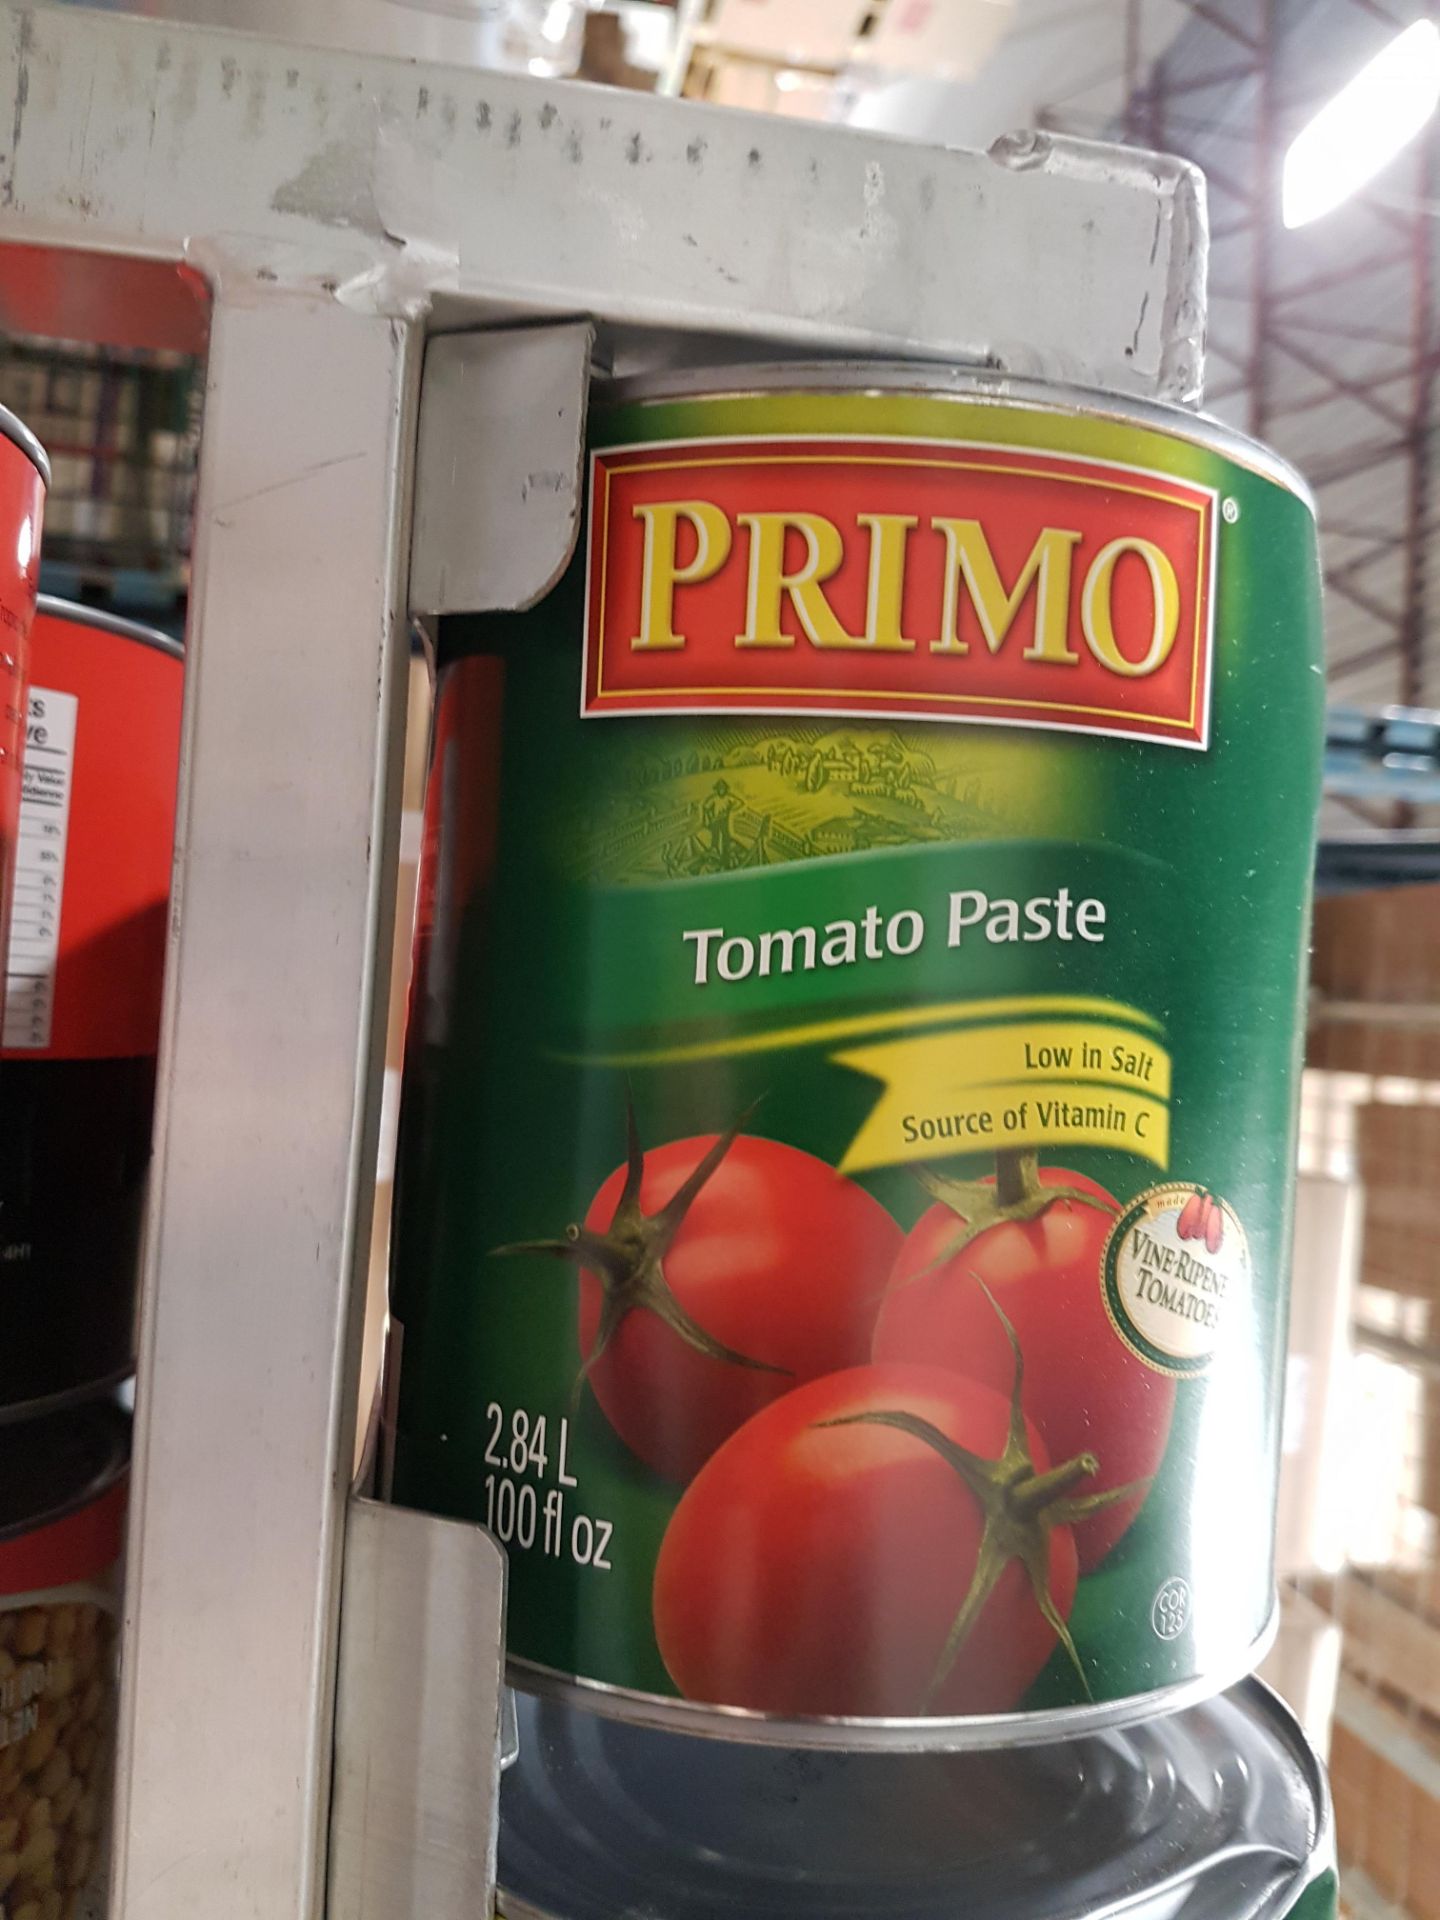 Primo Tomato Paste - 4 x 2.84LT Cans - Dented